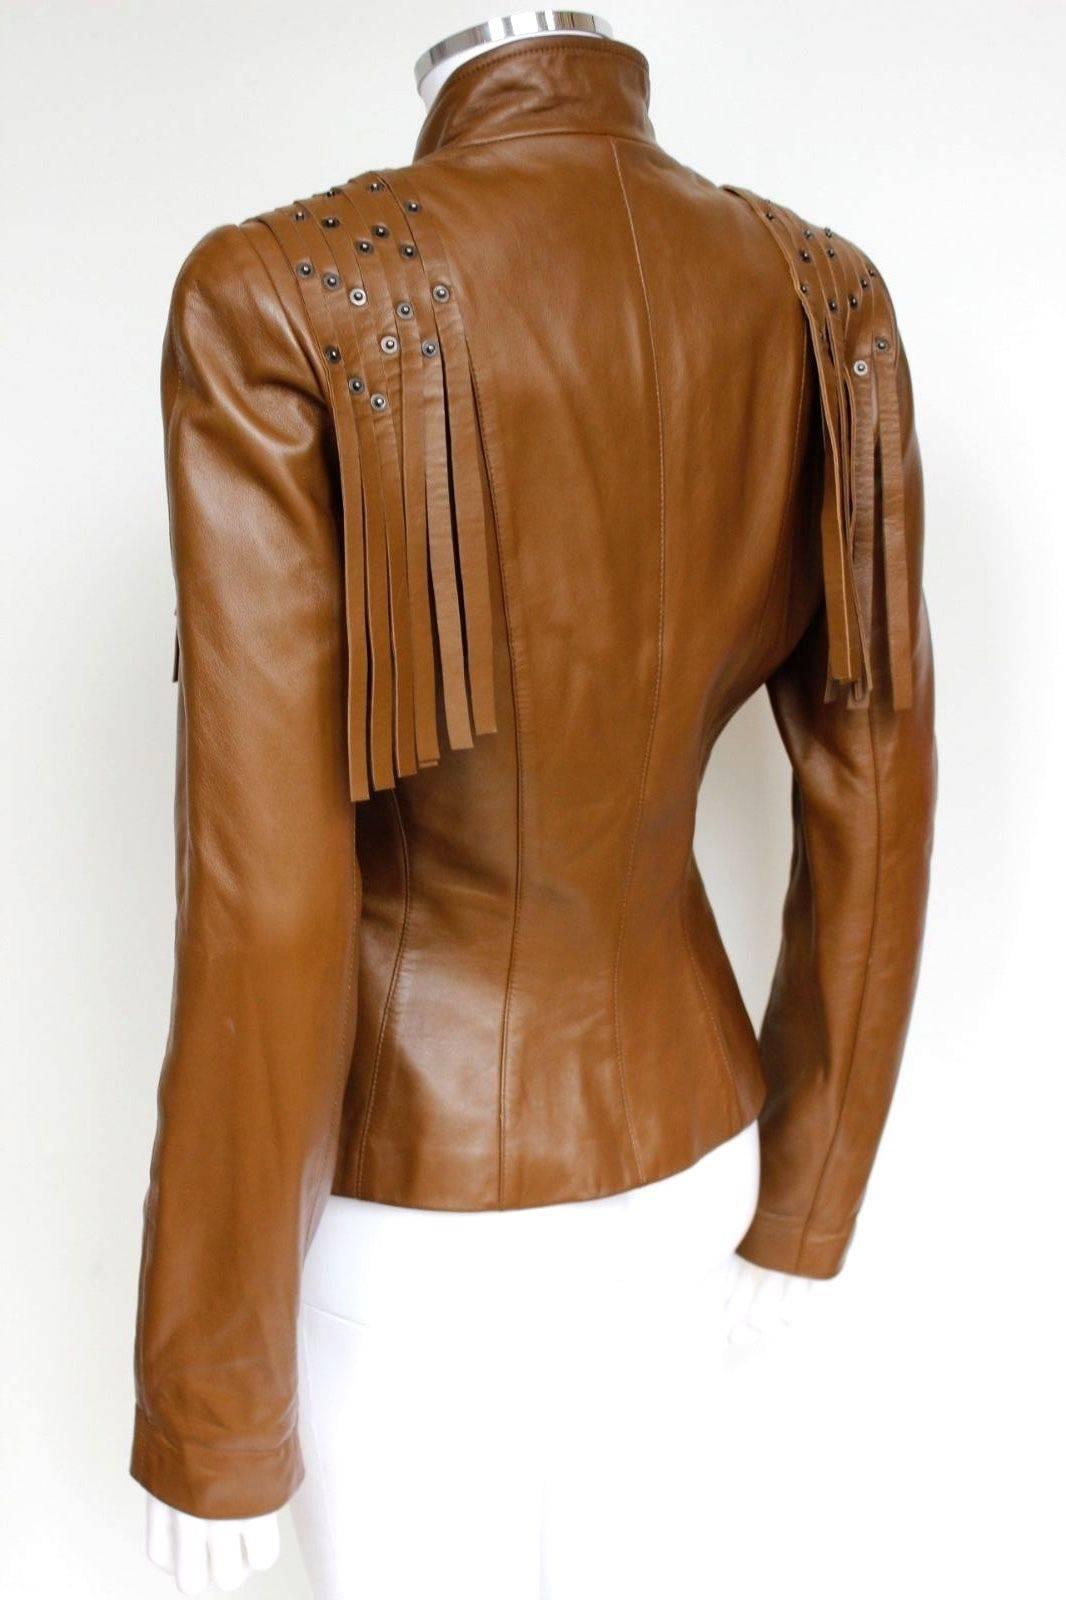 Mugler Tan Leather Fringe Jacket F38 UK 10 
Western style Jacket from Mugler featuring leather fringe with brass studs 
Zip fastening, fully lined 
Length 22 inches, sleeve 25 inches long. chest 17 inches across , waist 14 inches across laid